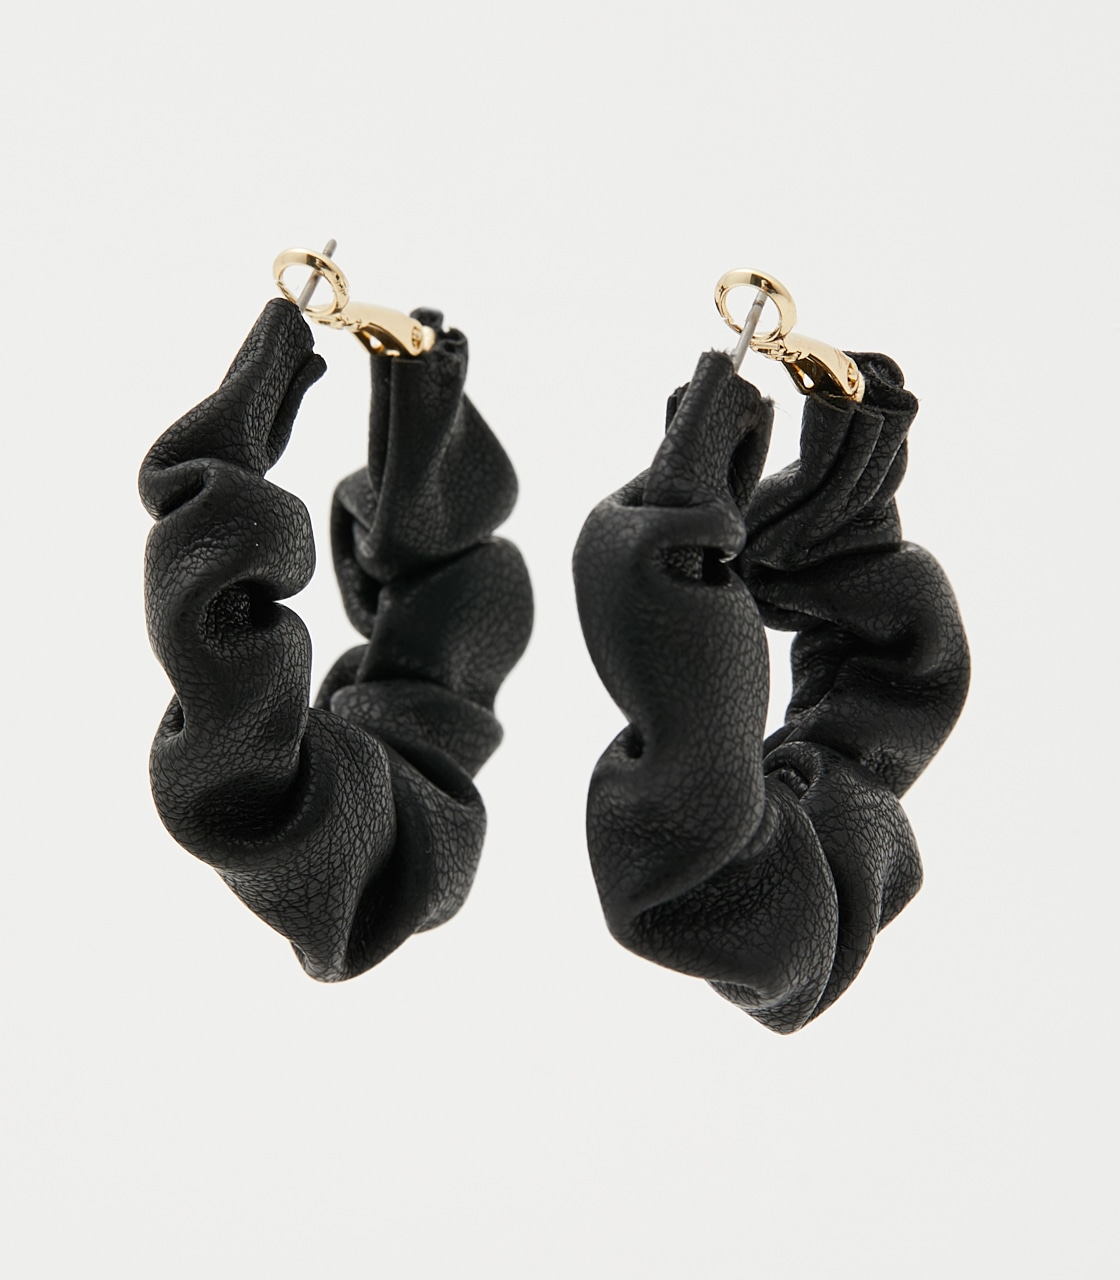 FAUX LEATHER GATHER EARRINGS/フェイクレザーギャザーピアス 詳細画像 BLK 2